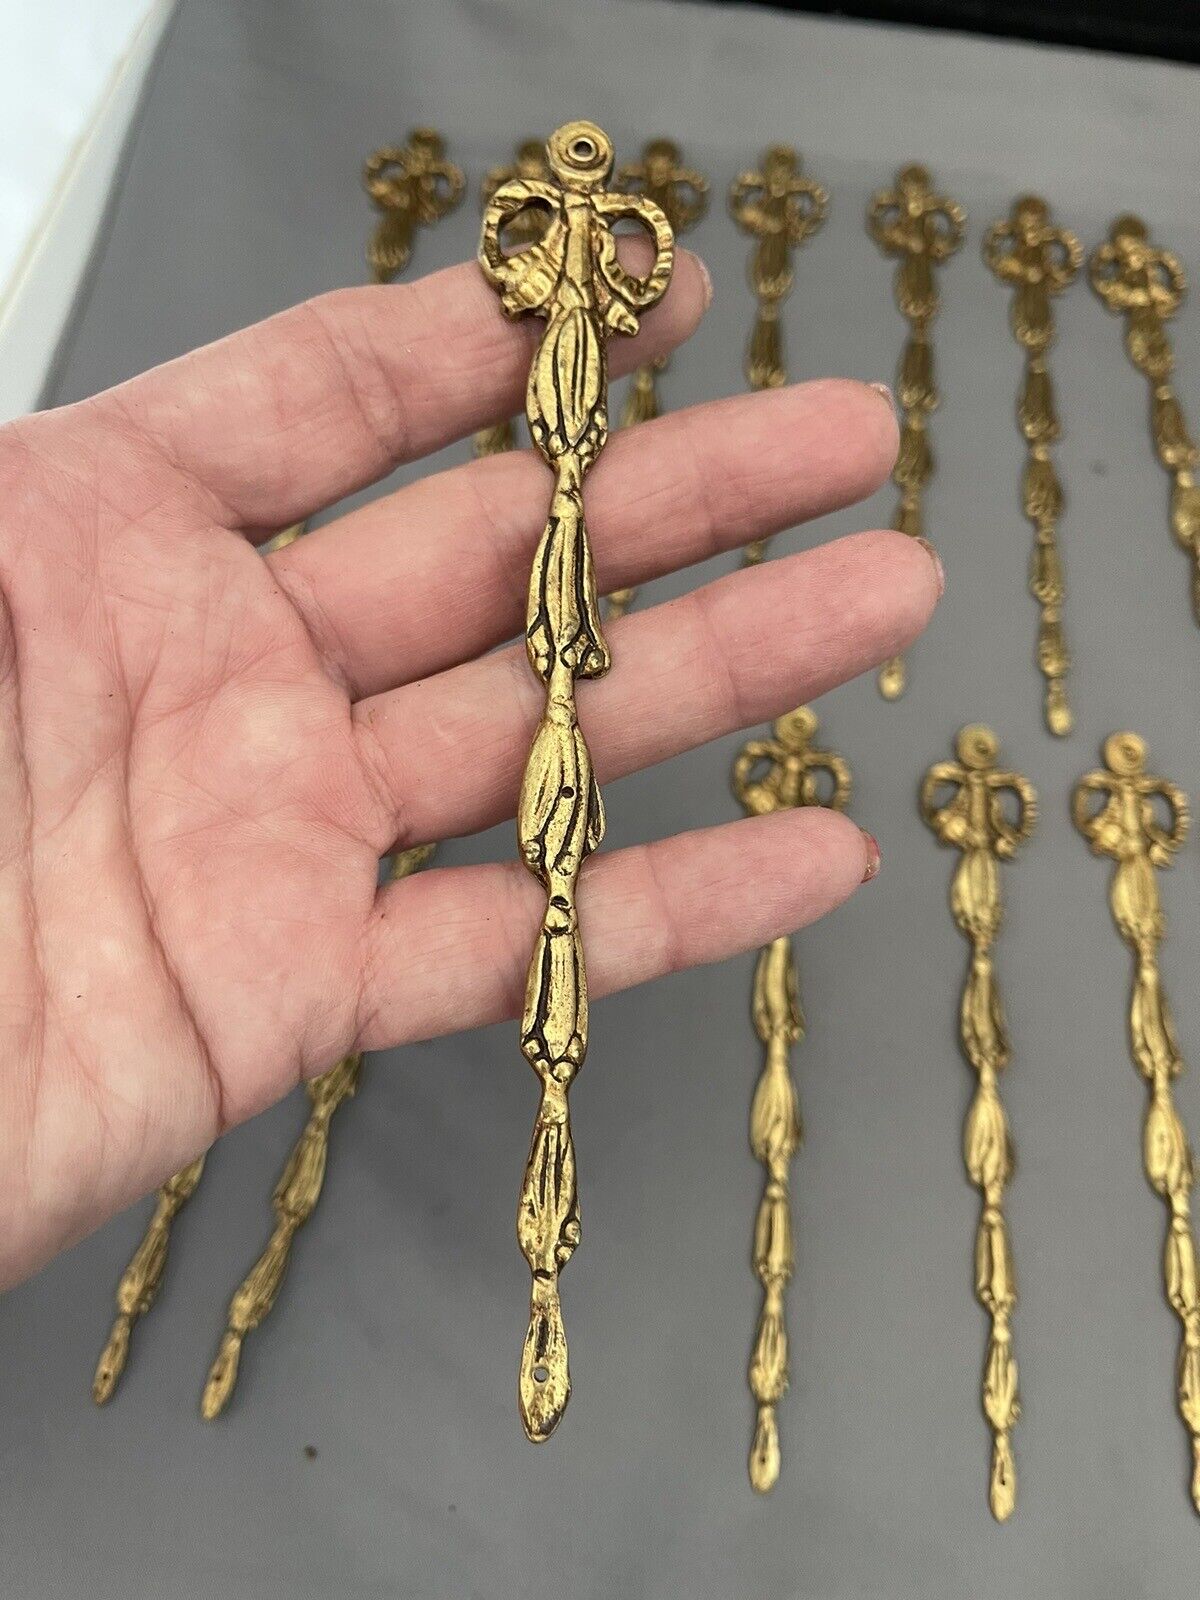 18 Antique Swing Swag Chain Decoration Vintage Gold Color Ornate Includes Nails